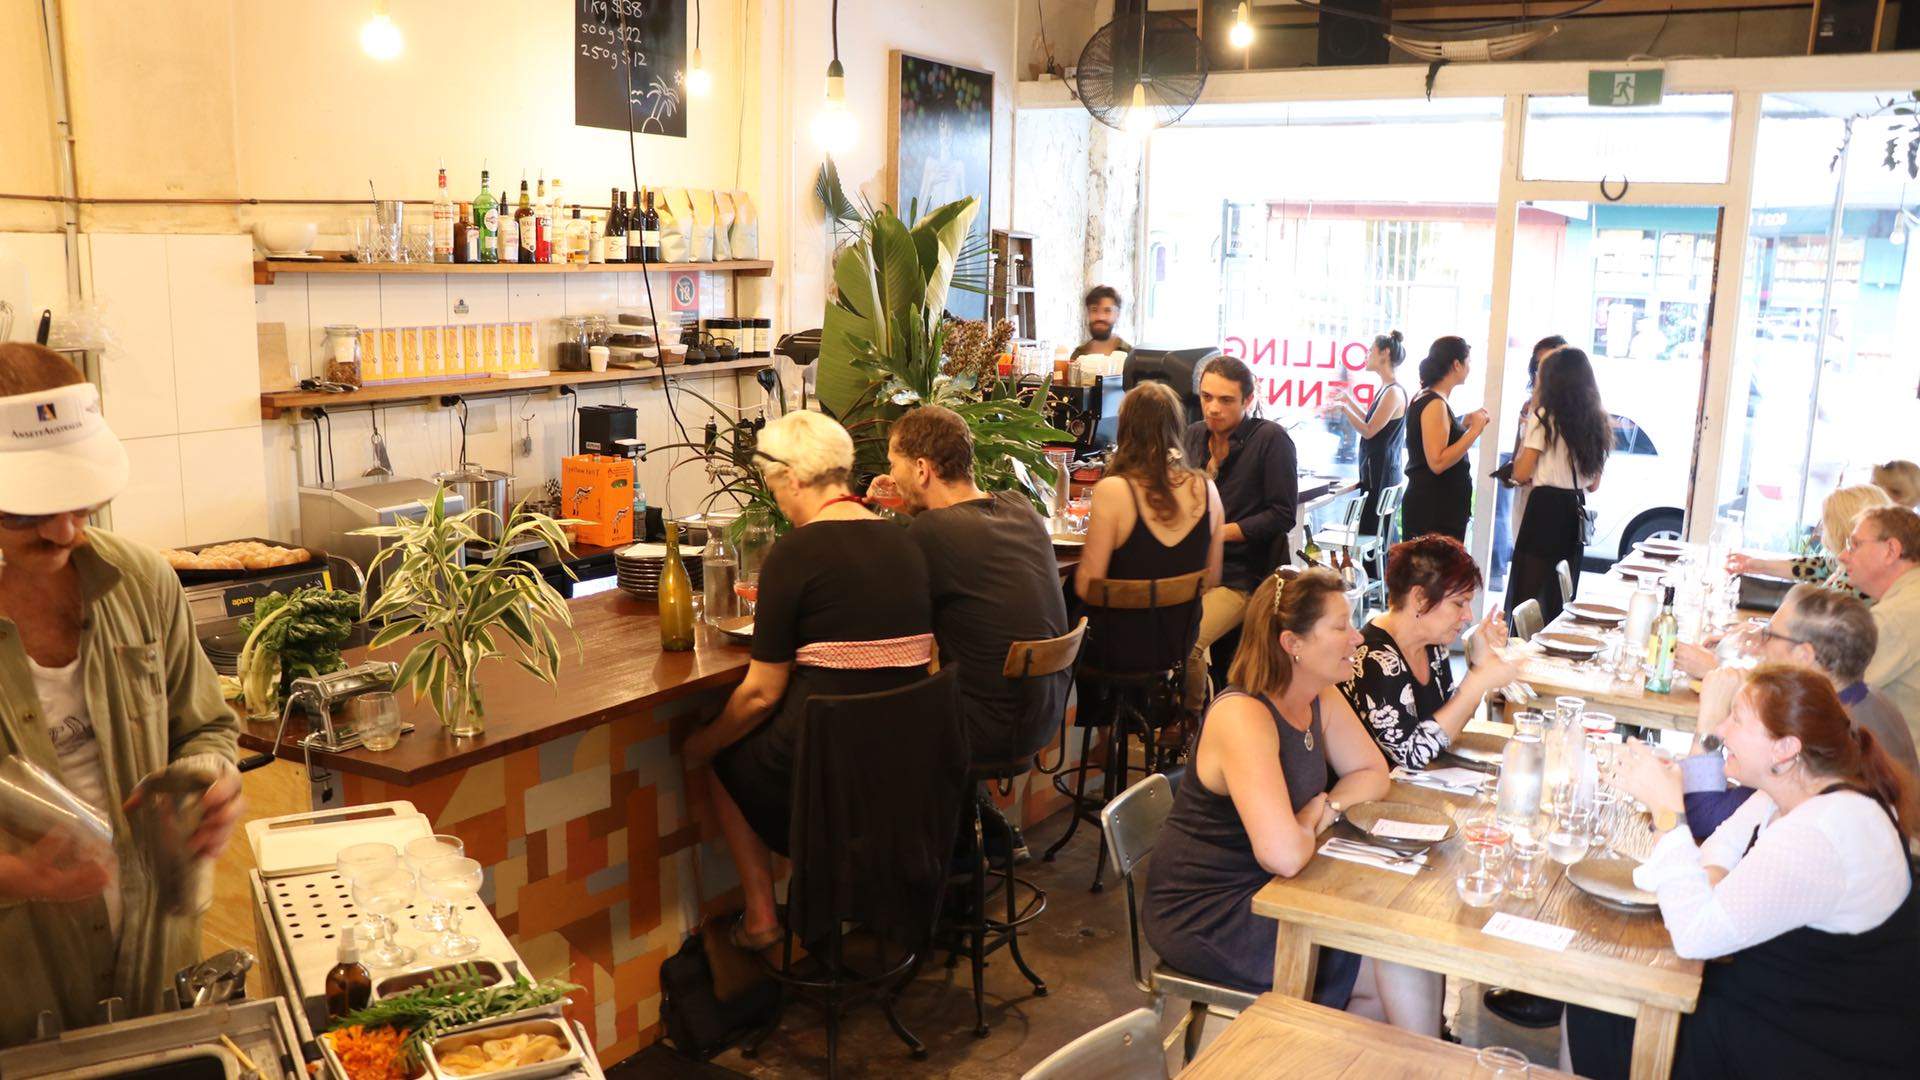 People eating at tables and at the bar at rolling penny, - one of the best cafes in Sydney